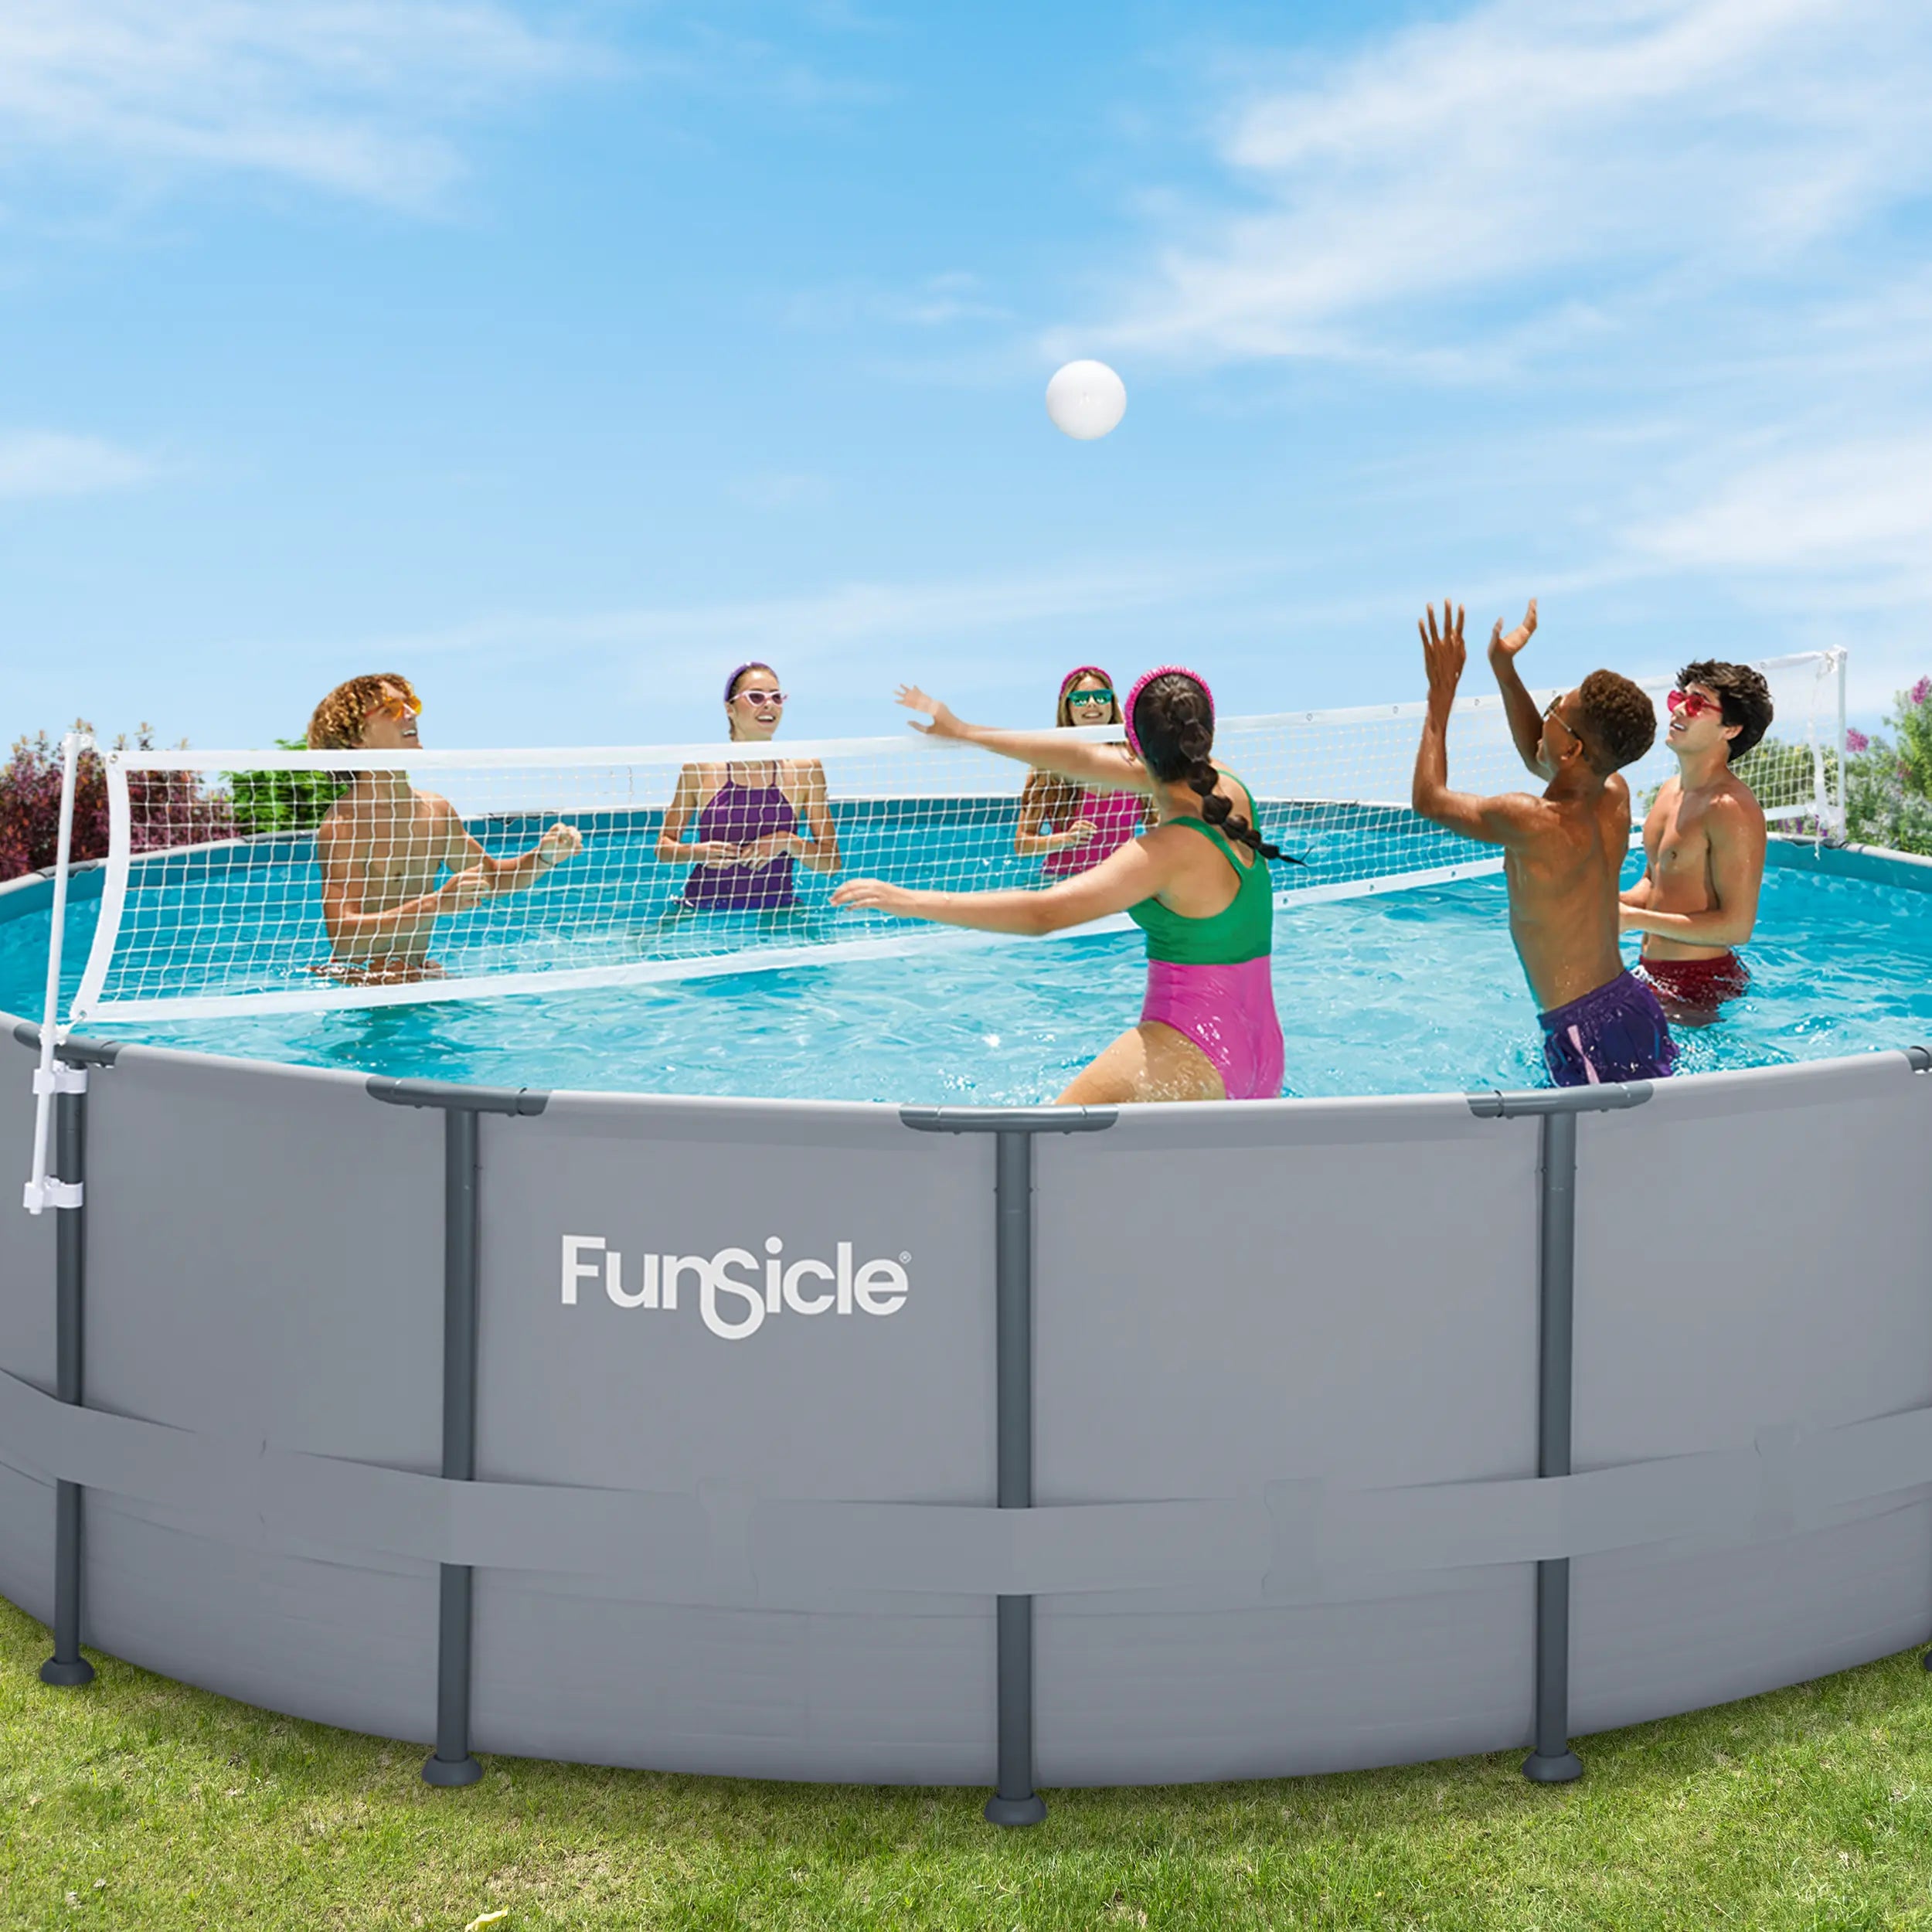 Funsicle Volleyball Set with models